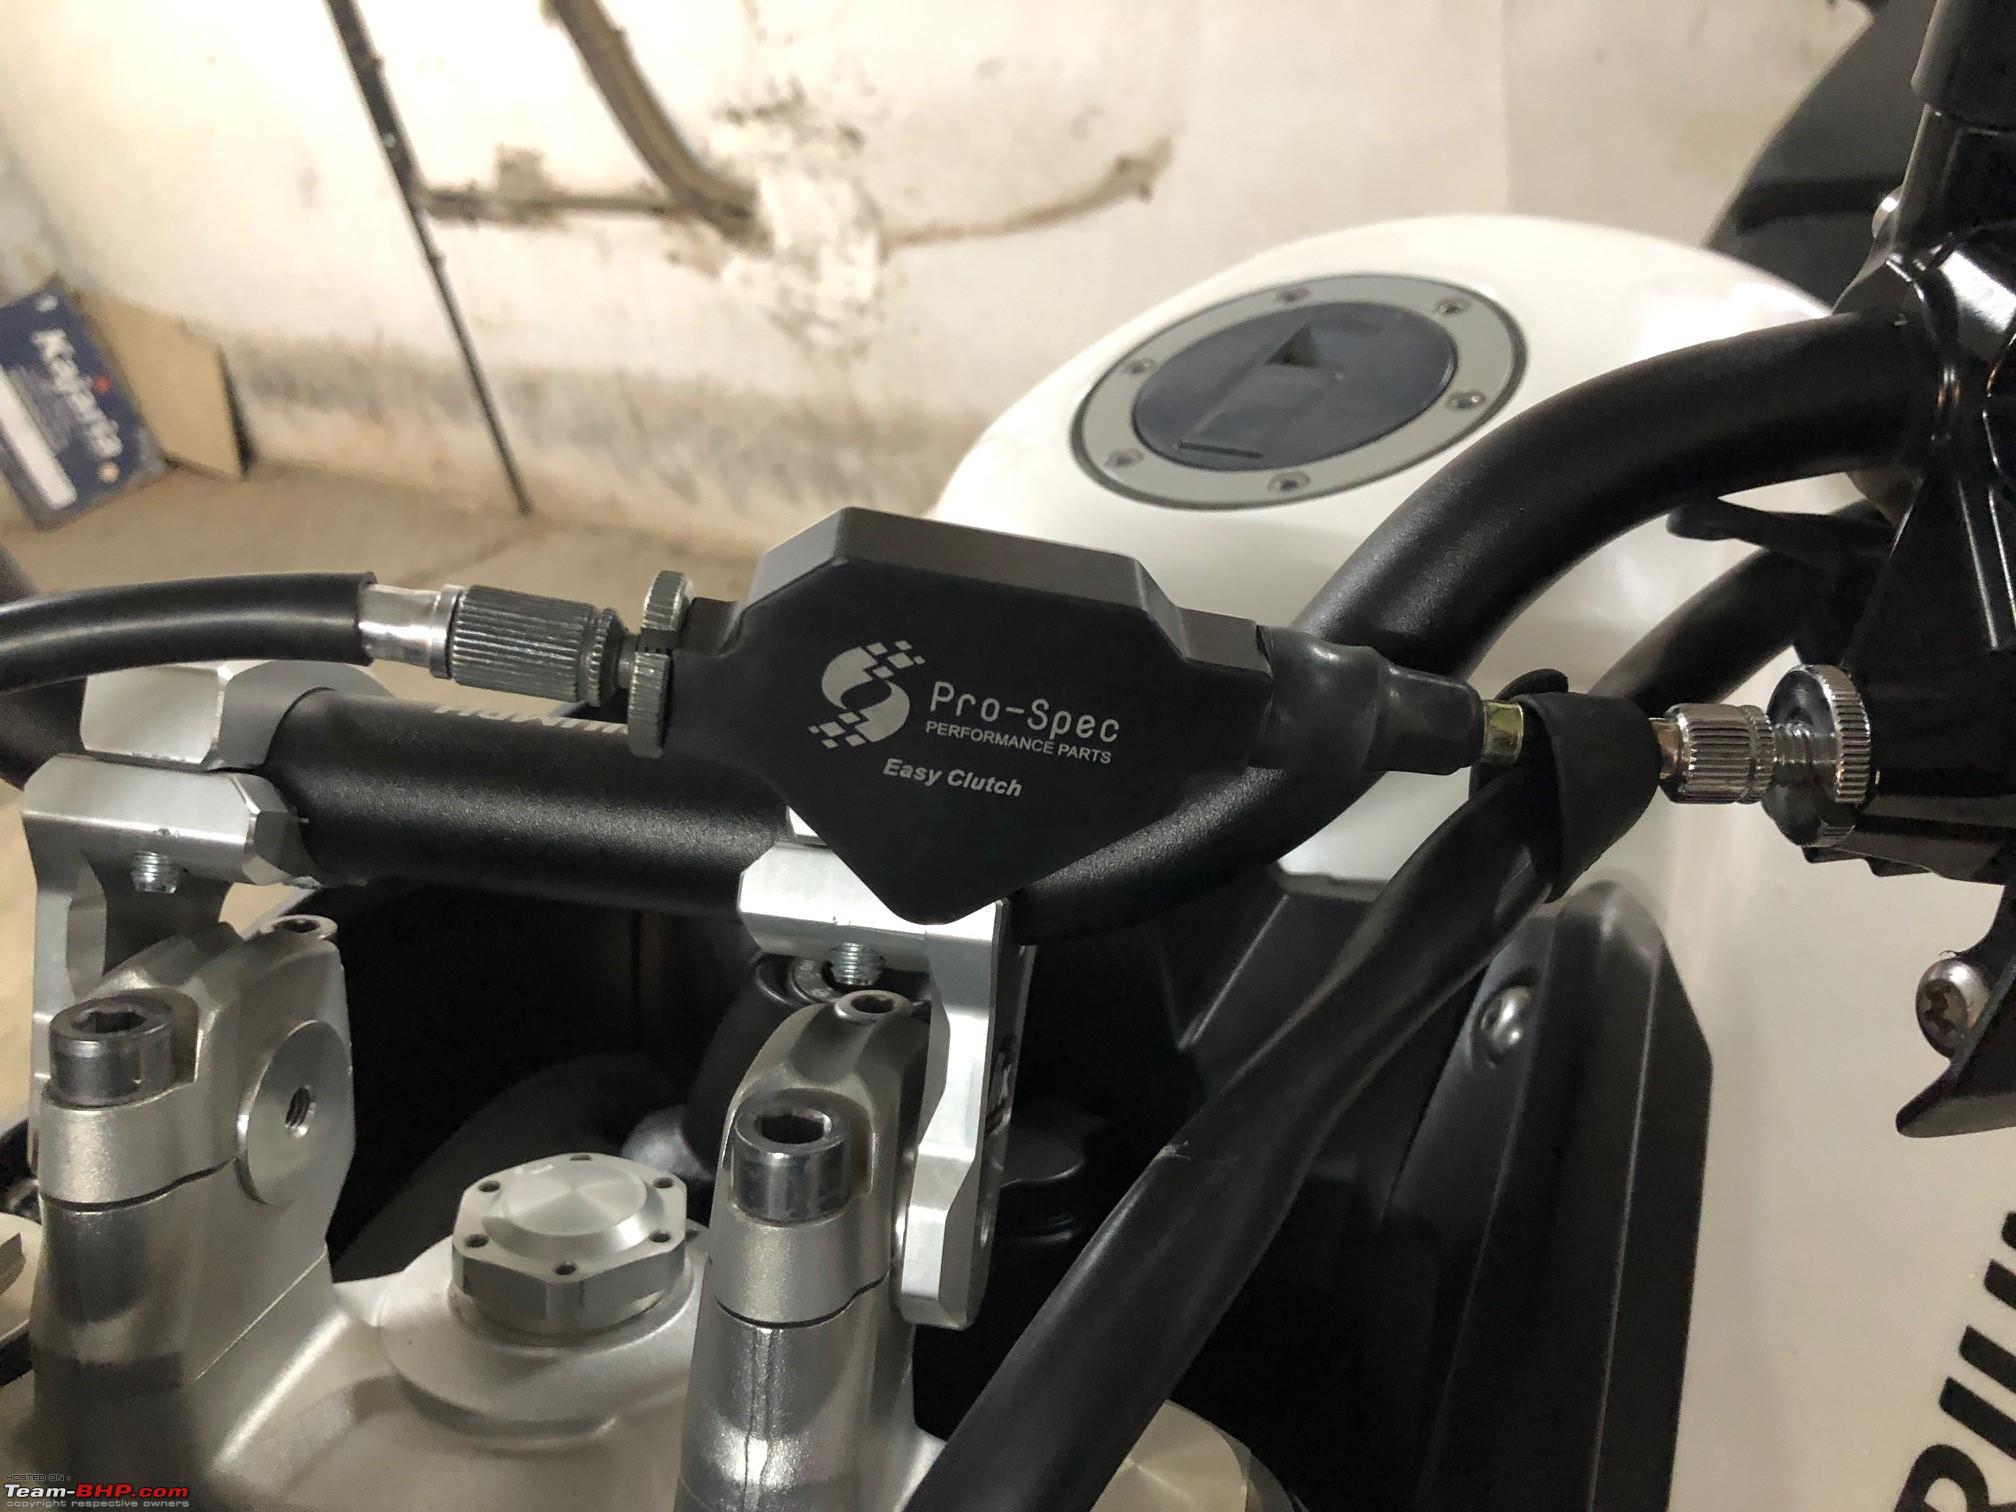 Easy Clutch by Pro-Spec: Reduces effort to operate clutch lever ...